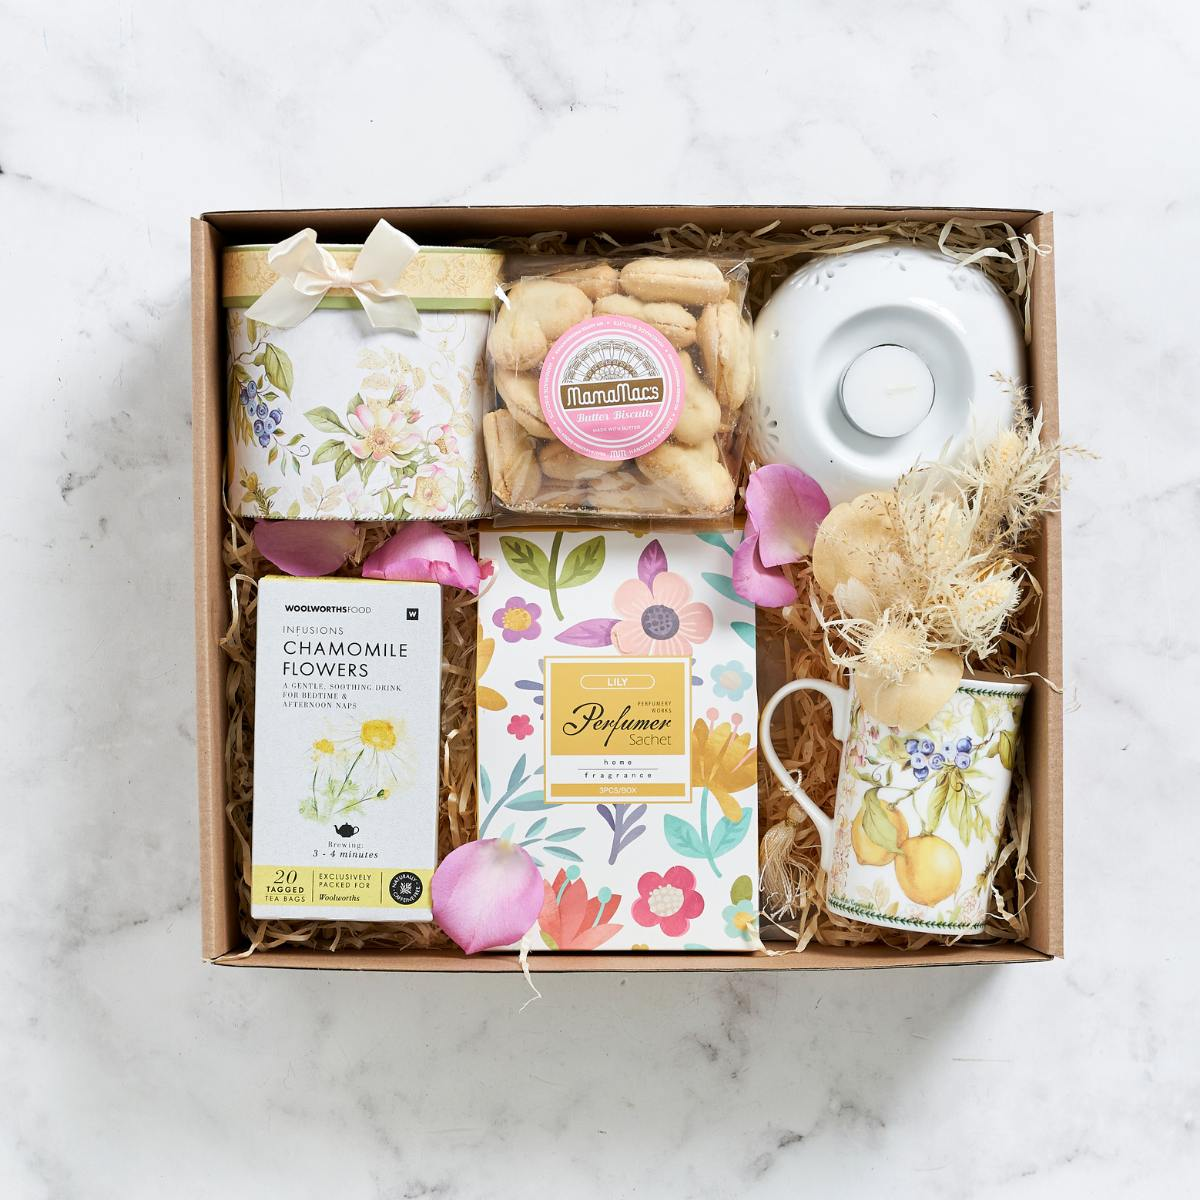 Sweet Serenity, nationwide delivery of gift hampers to make mom feel good